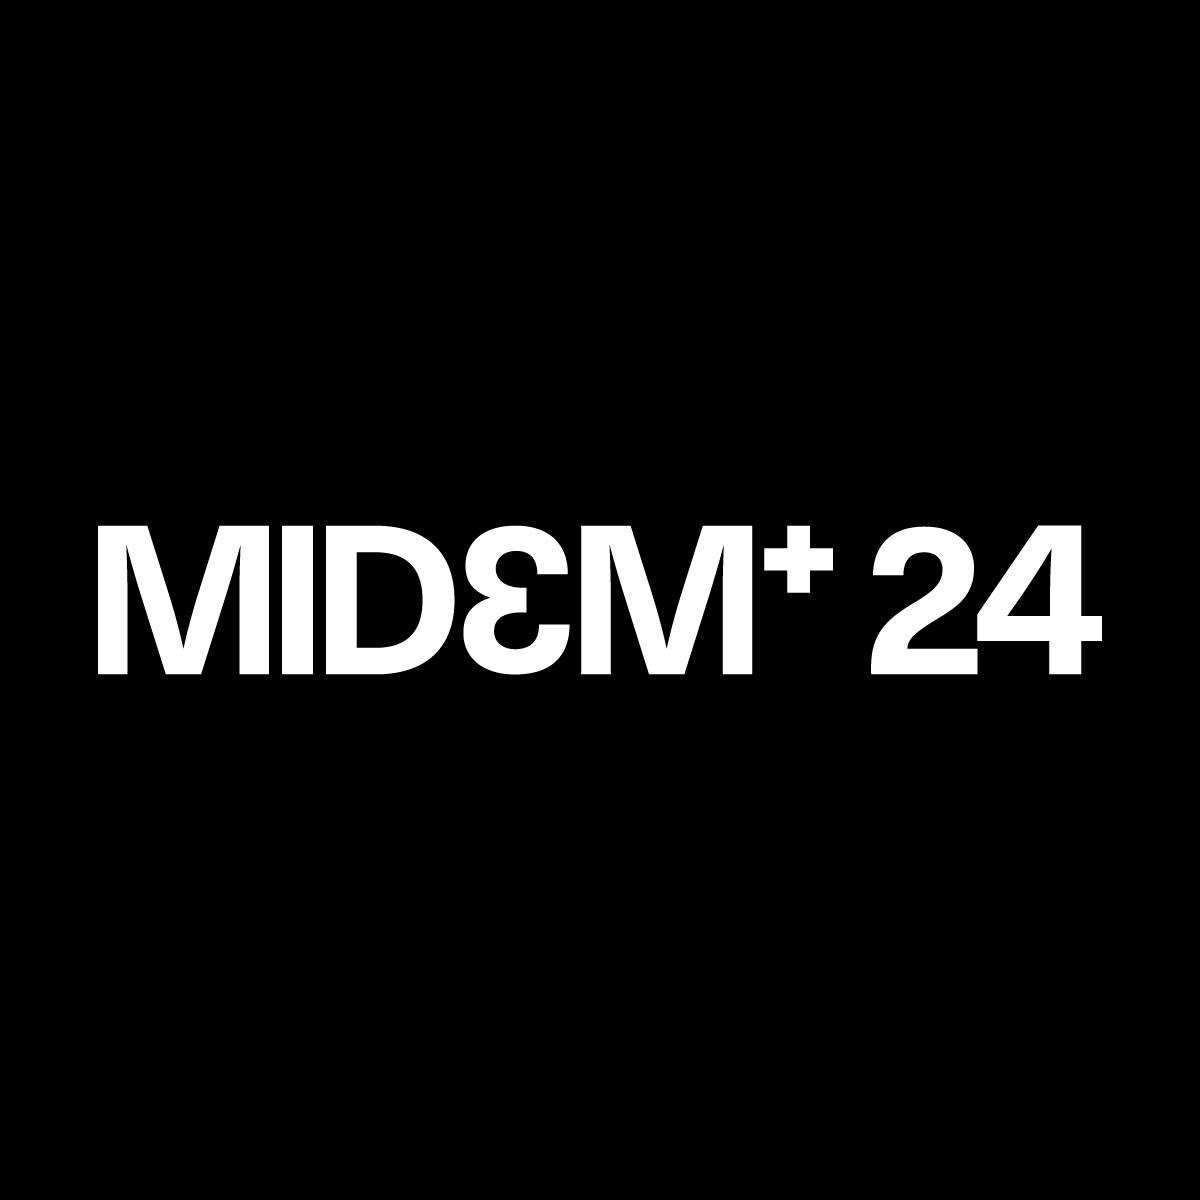 The Midem is back : Where it all started for Clubbing TV